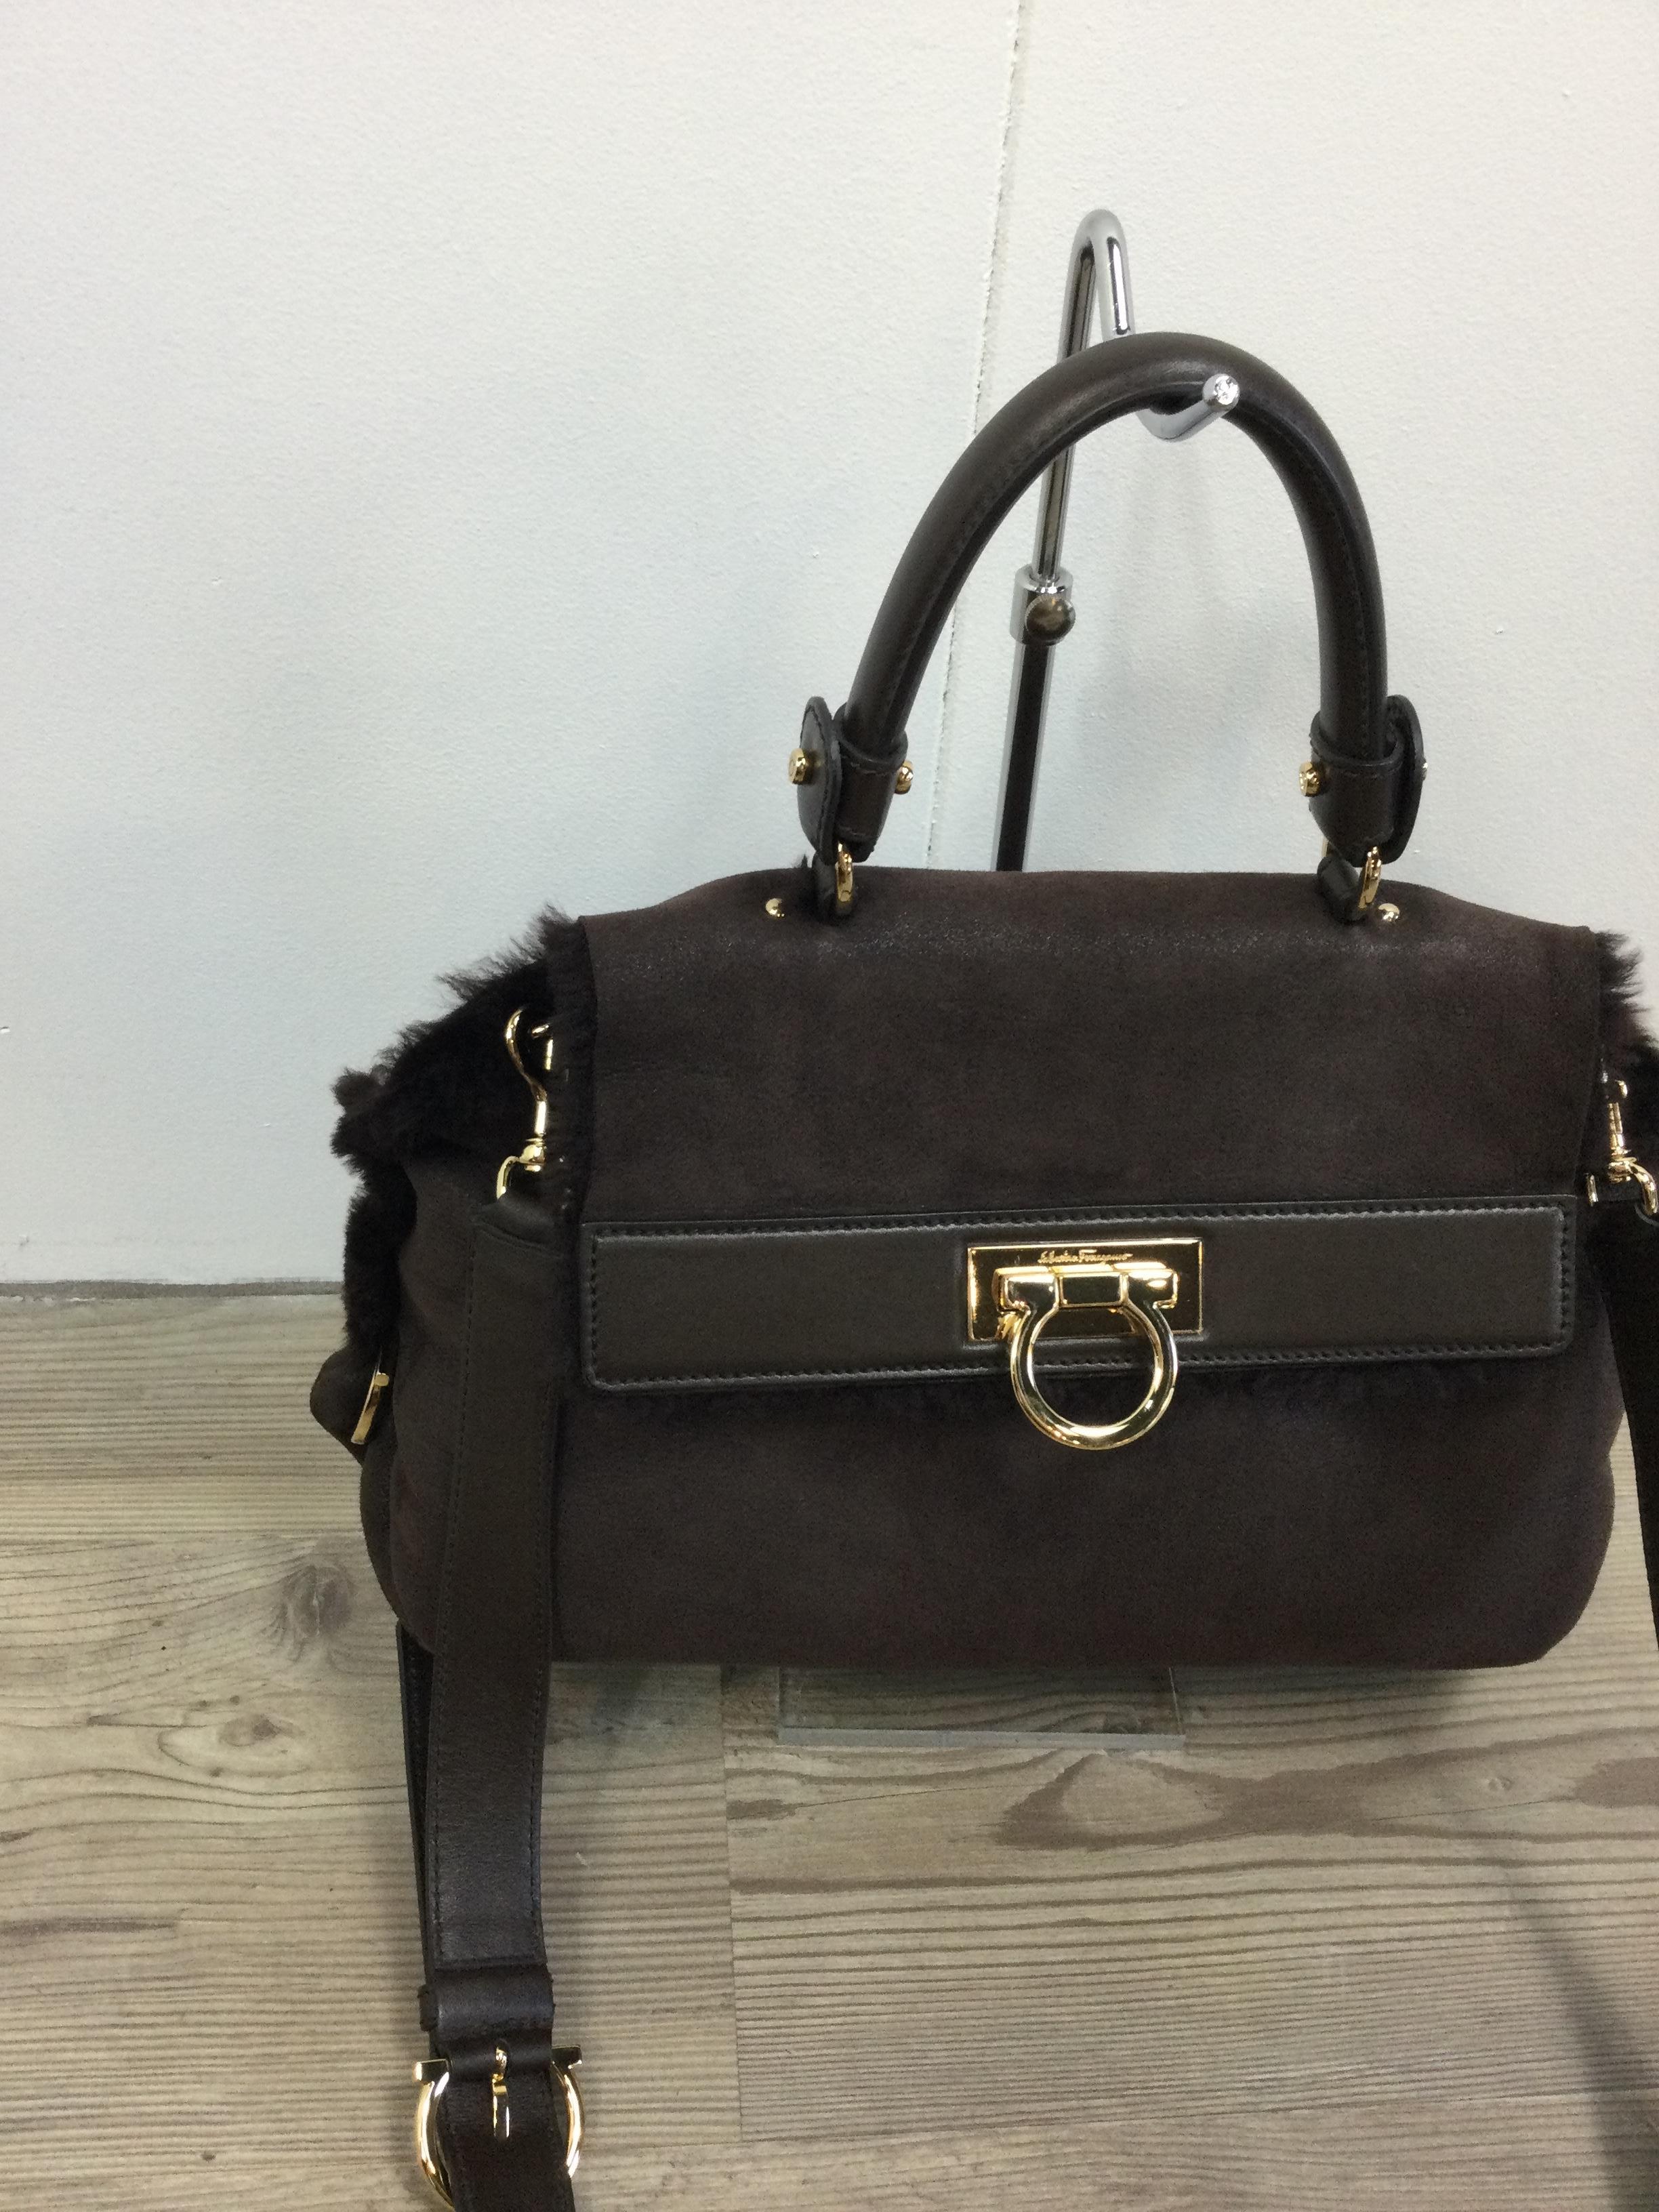 Salvatore Ferragamo Sofia bag.
Brown suede and gold hardware. Details & shoulder strap in brown leather.
Fur & leather interior are in perfect conditions.
Featuring an internal pocket.
It comes with the original dust bag.
Measurements:
Height 23